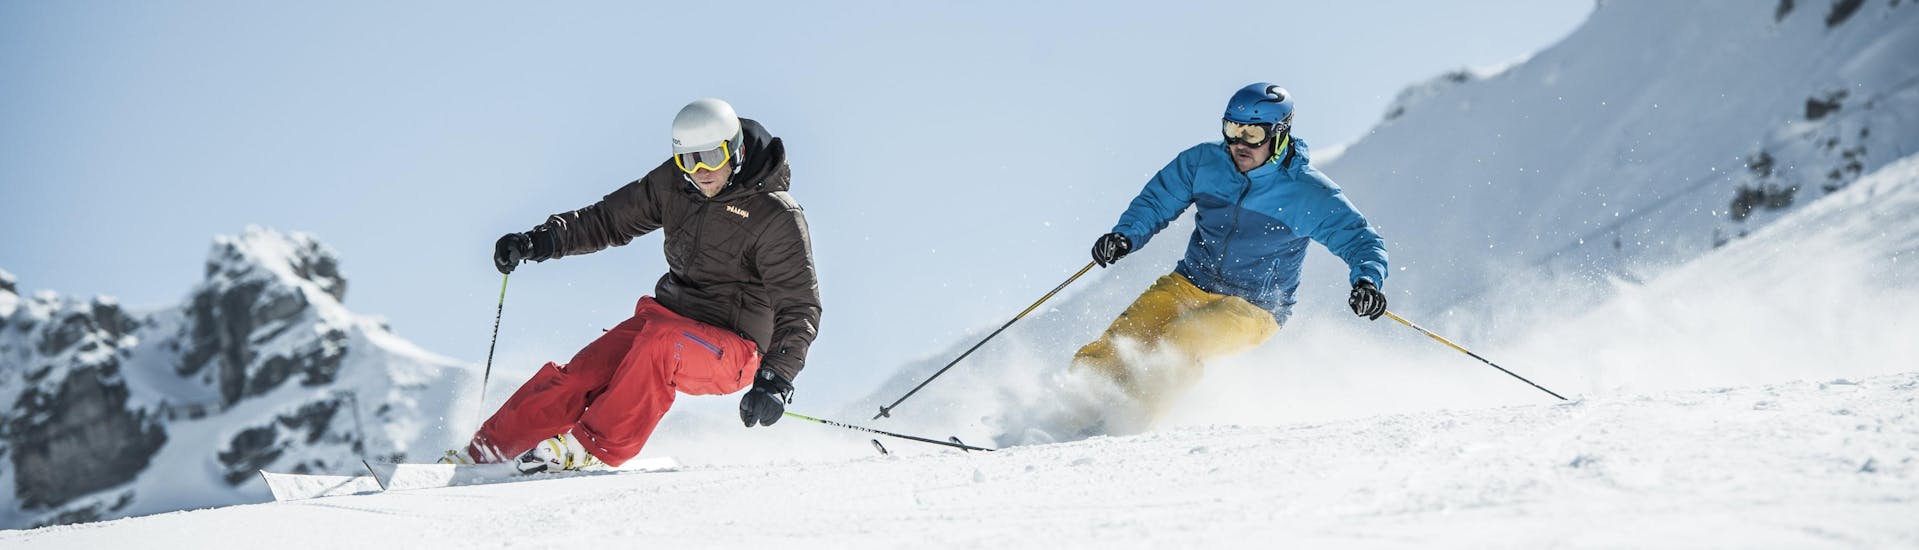 A skier practices the correct skiing technique during one of the private lessons in Davos.